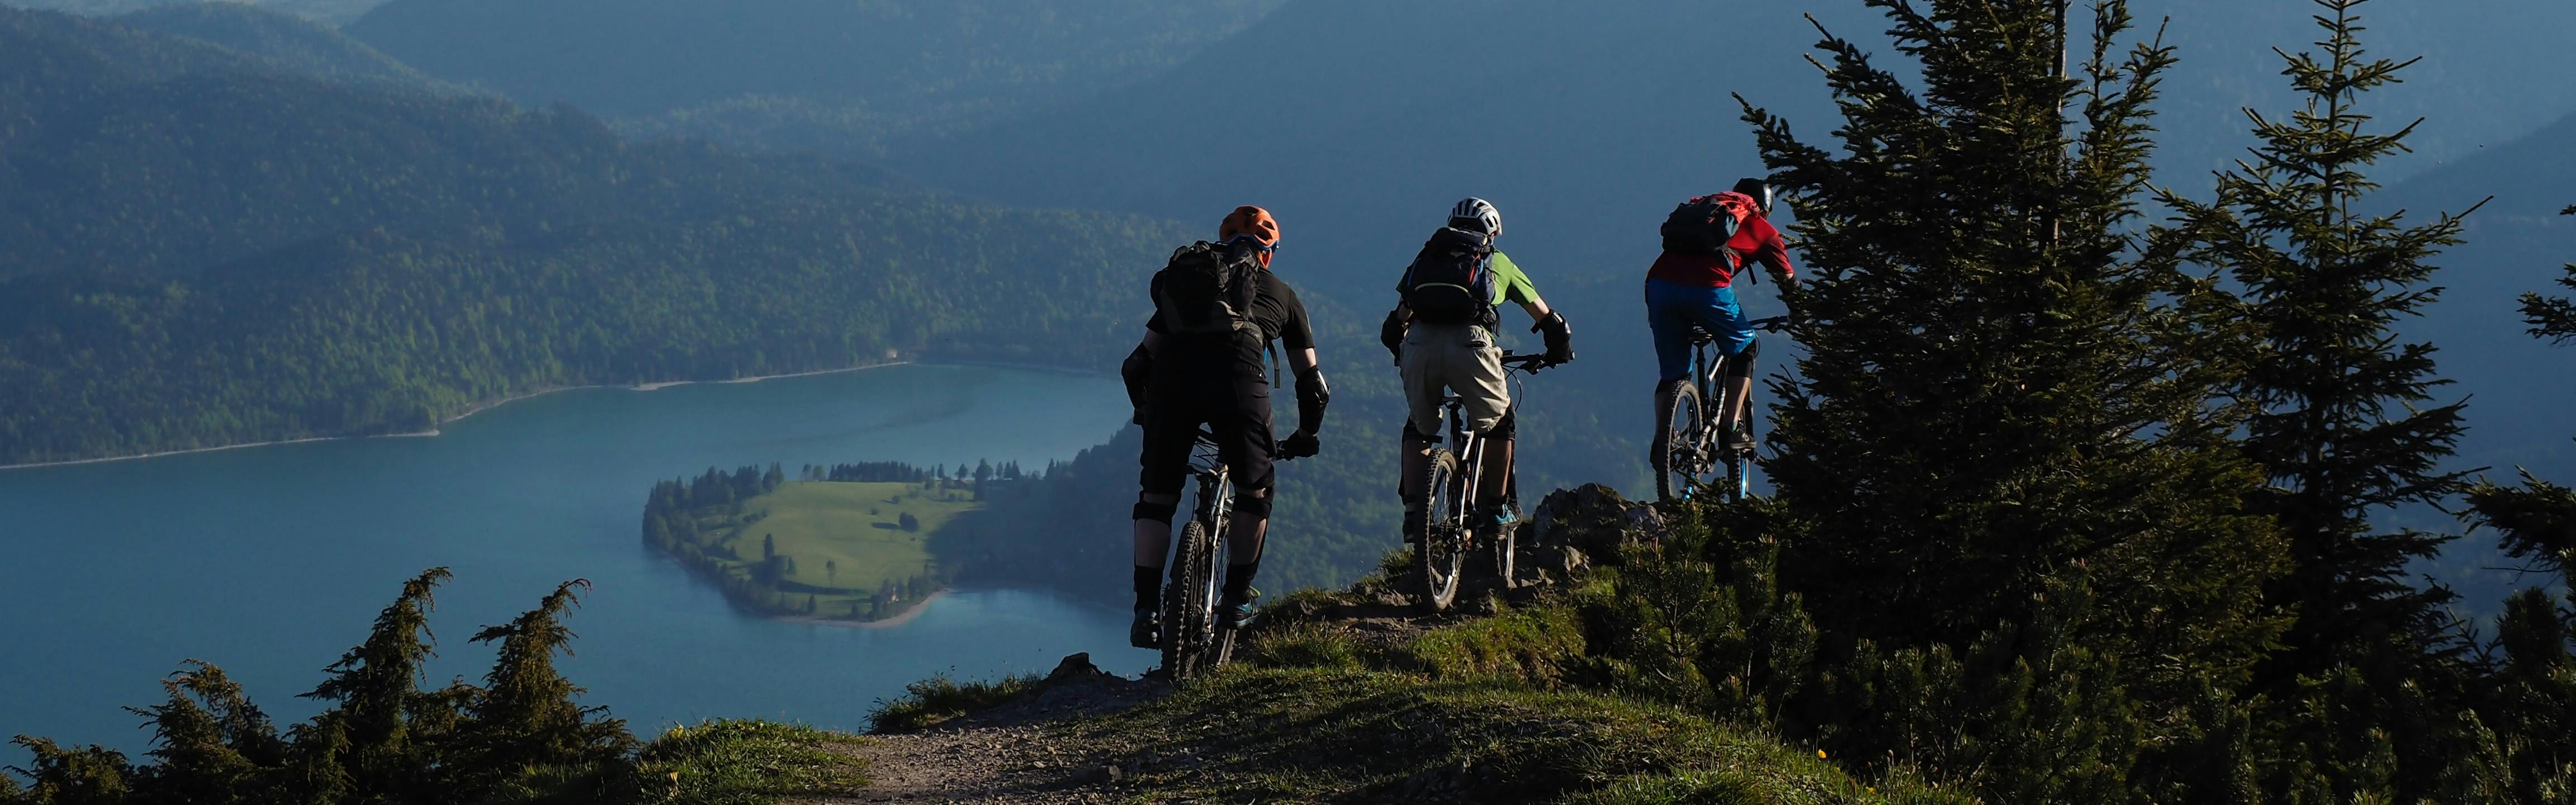 Three mountain bikers ride away from the camera across a narrow ridge. Lakes and hills with trees are in the background to the left.